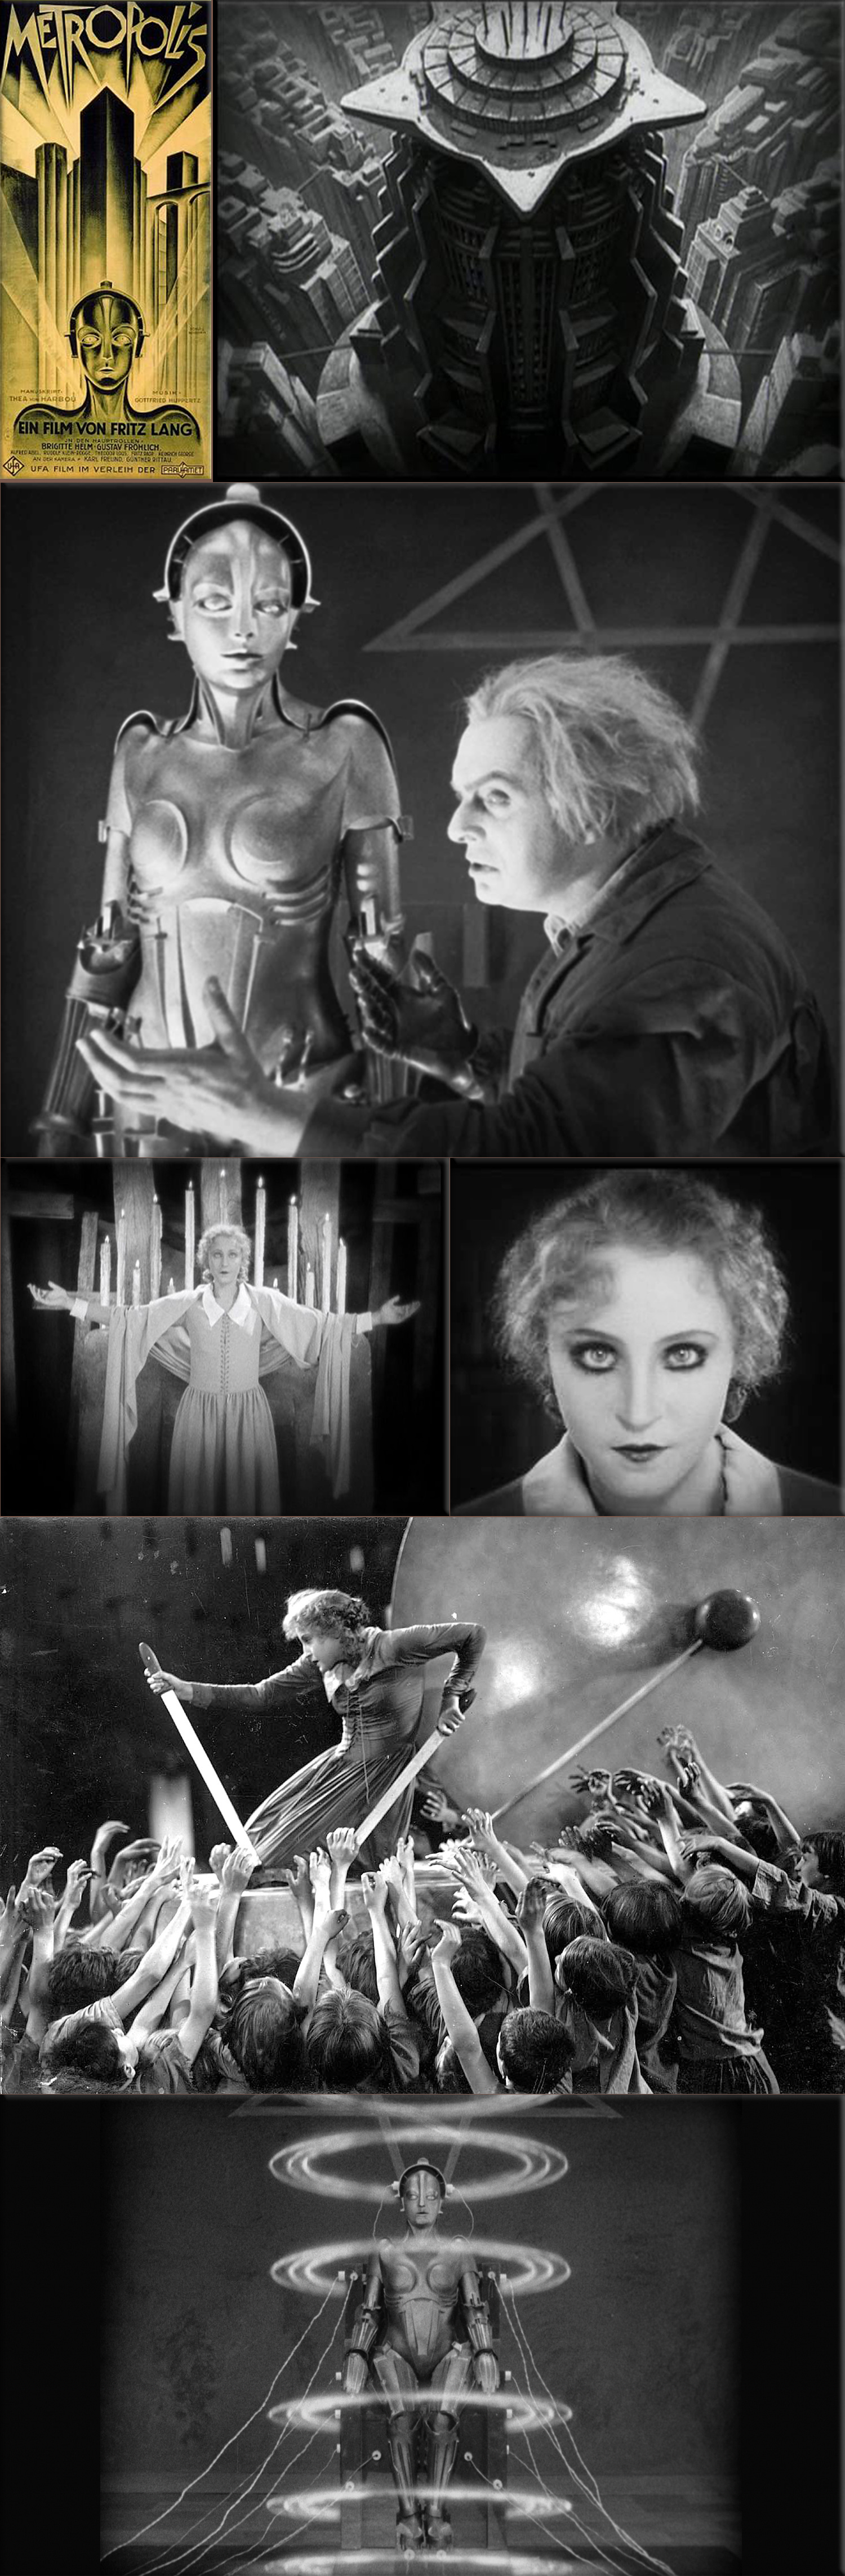 Fritz Lang's futuristic film Metropolis is released in Germany (Original 1927 theatrical release poster; Tower of Babel; Brigitte Helm as Maria; Mad scientist Rotwang (Rudolf Klein-Rogge) prepares to transform his robot into the likeness of Maria (Brigitte Helm))